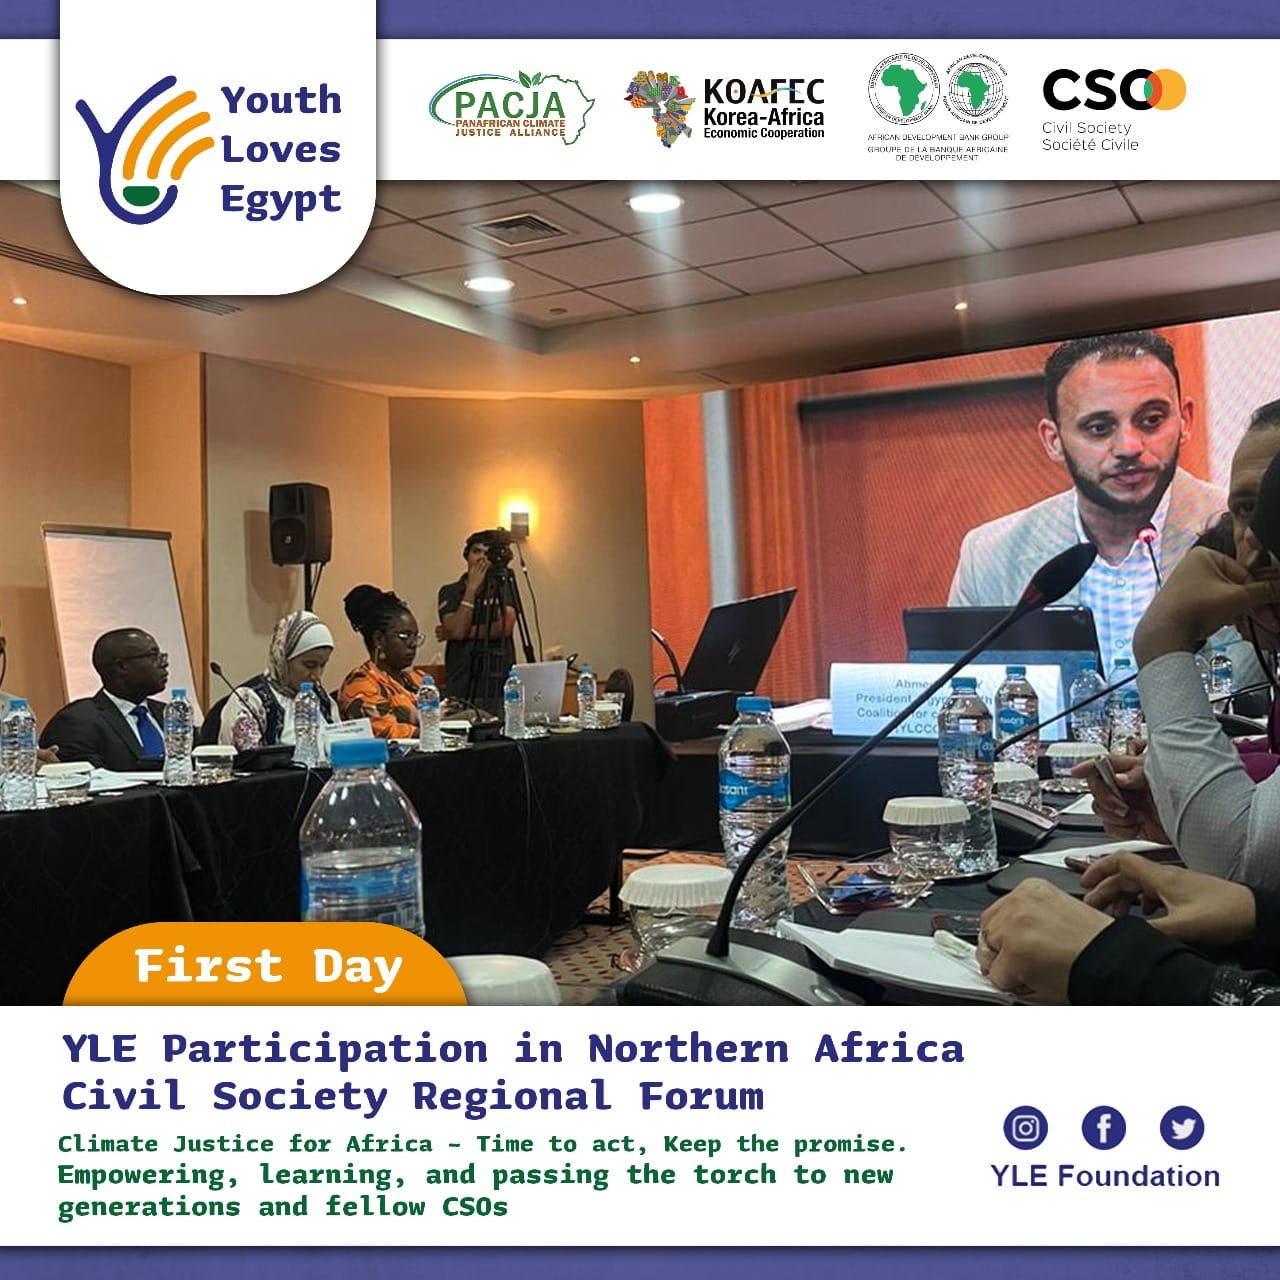  YLE Foundation participates in The Northern Africa Civil Society Regional Forum 